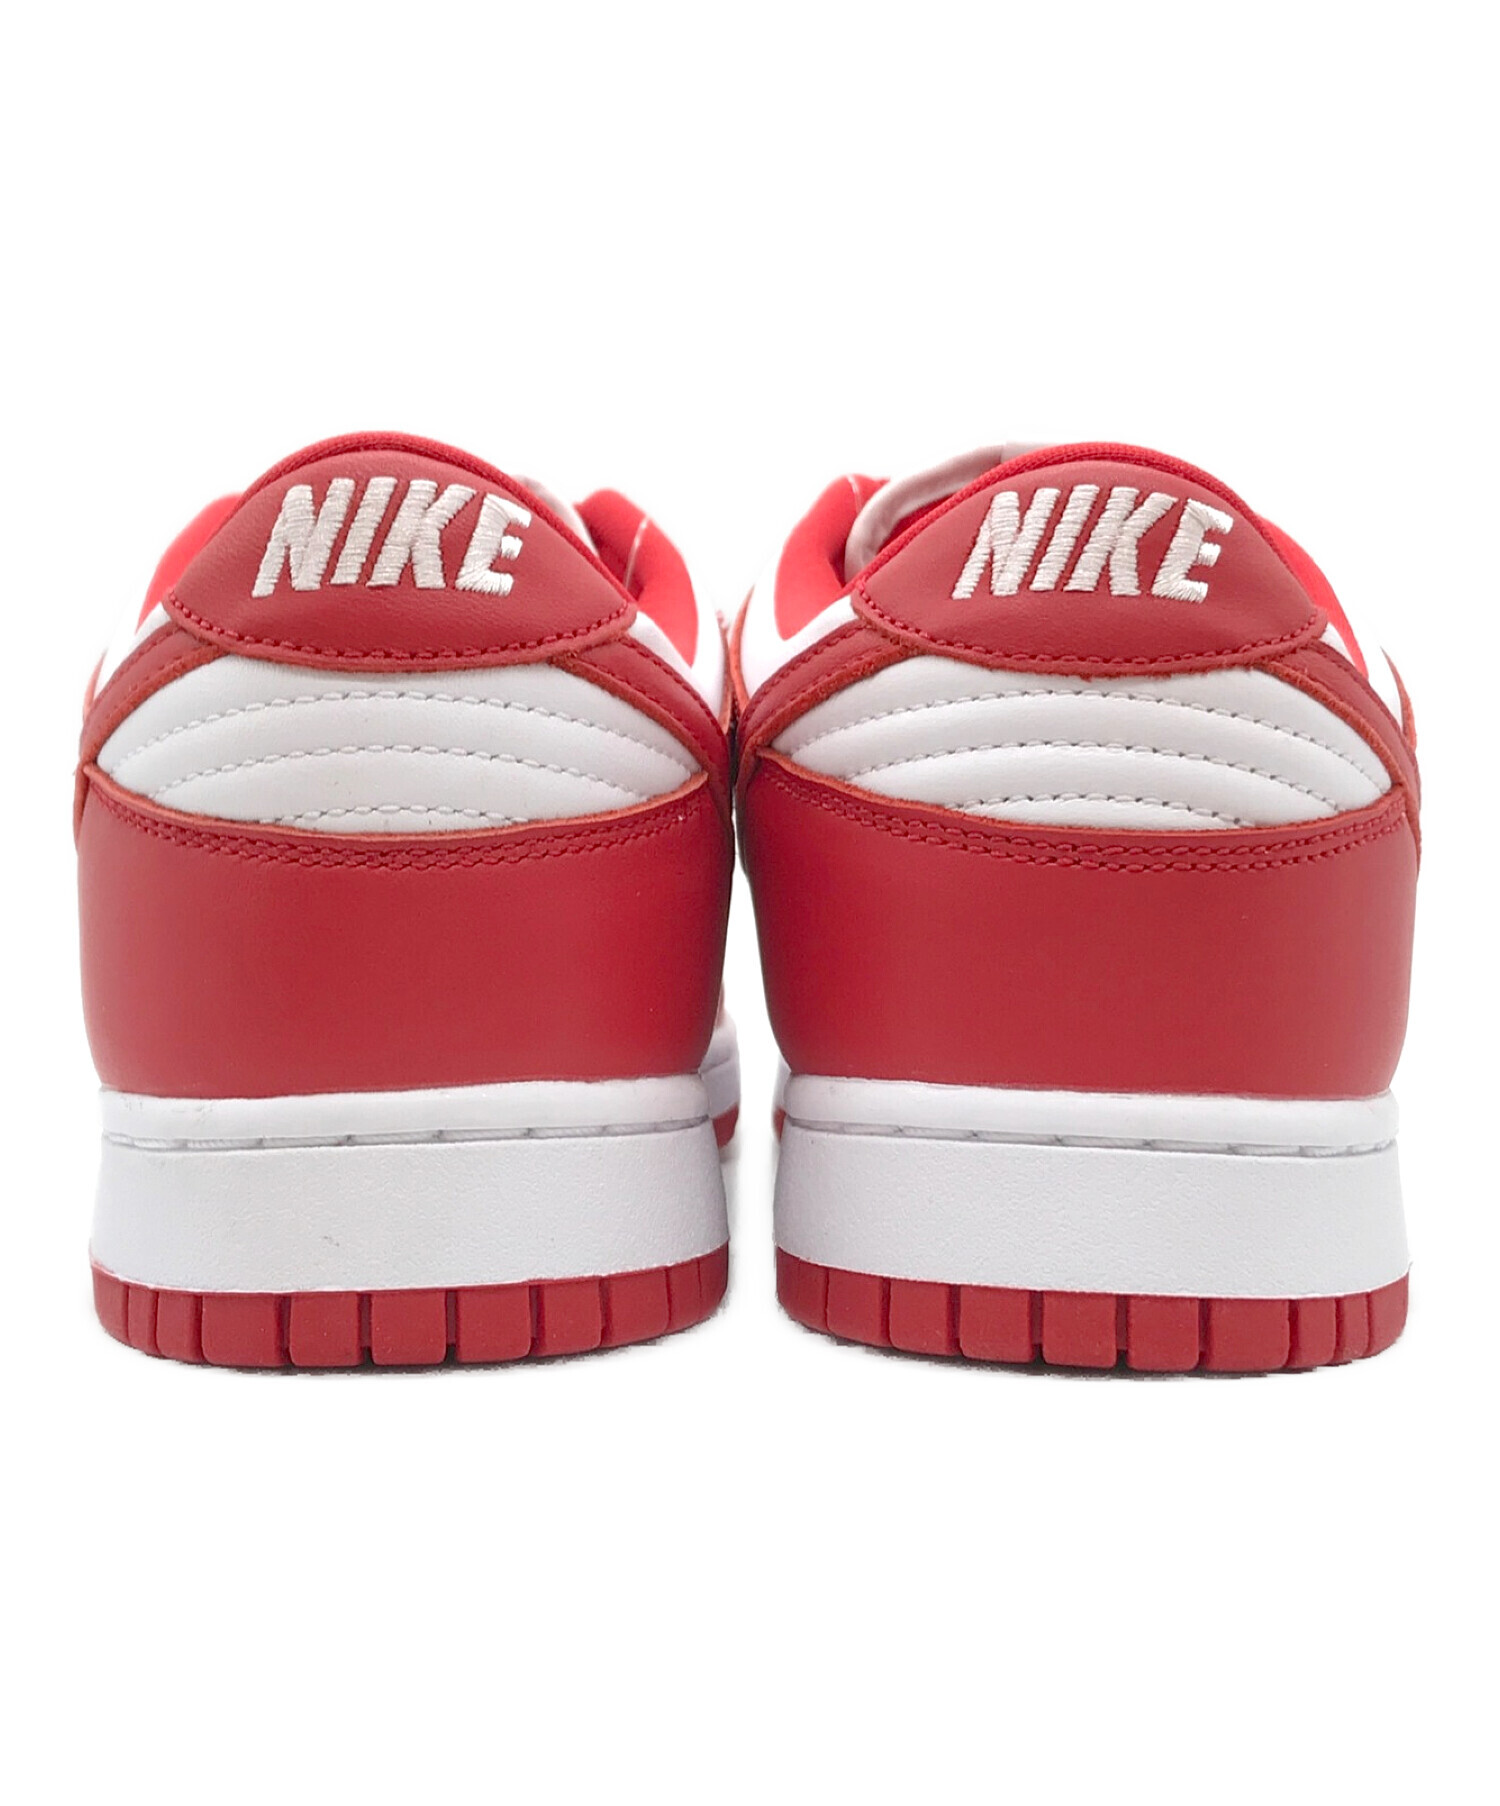 NIKE ダンク White and University Red 27.5NIKEダンク